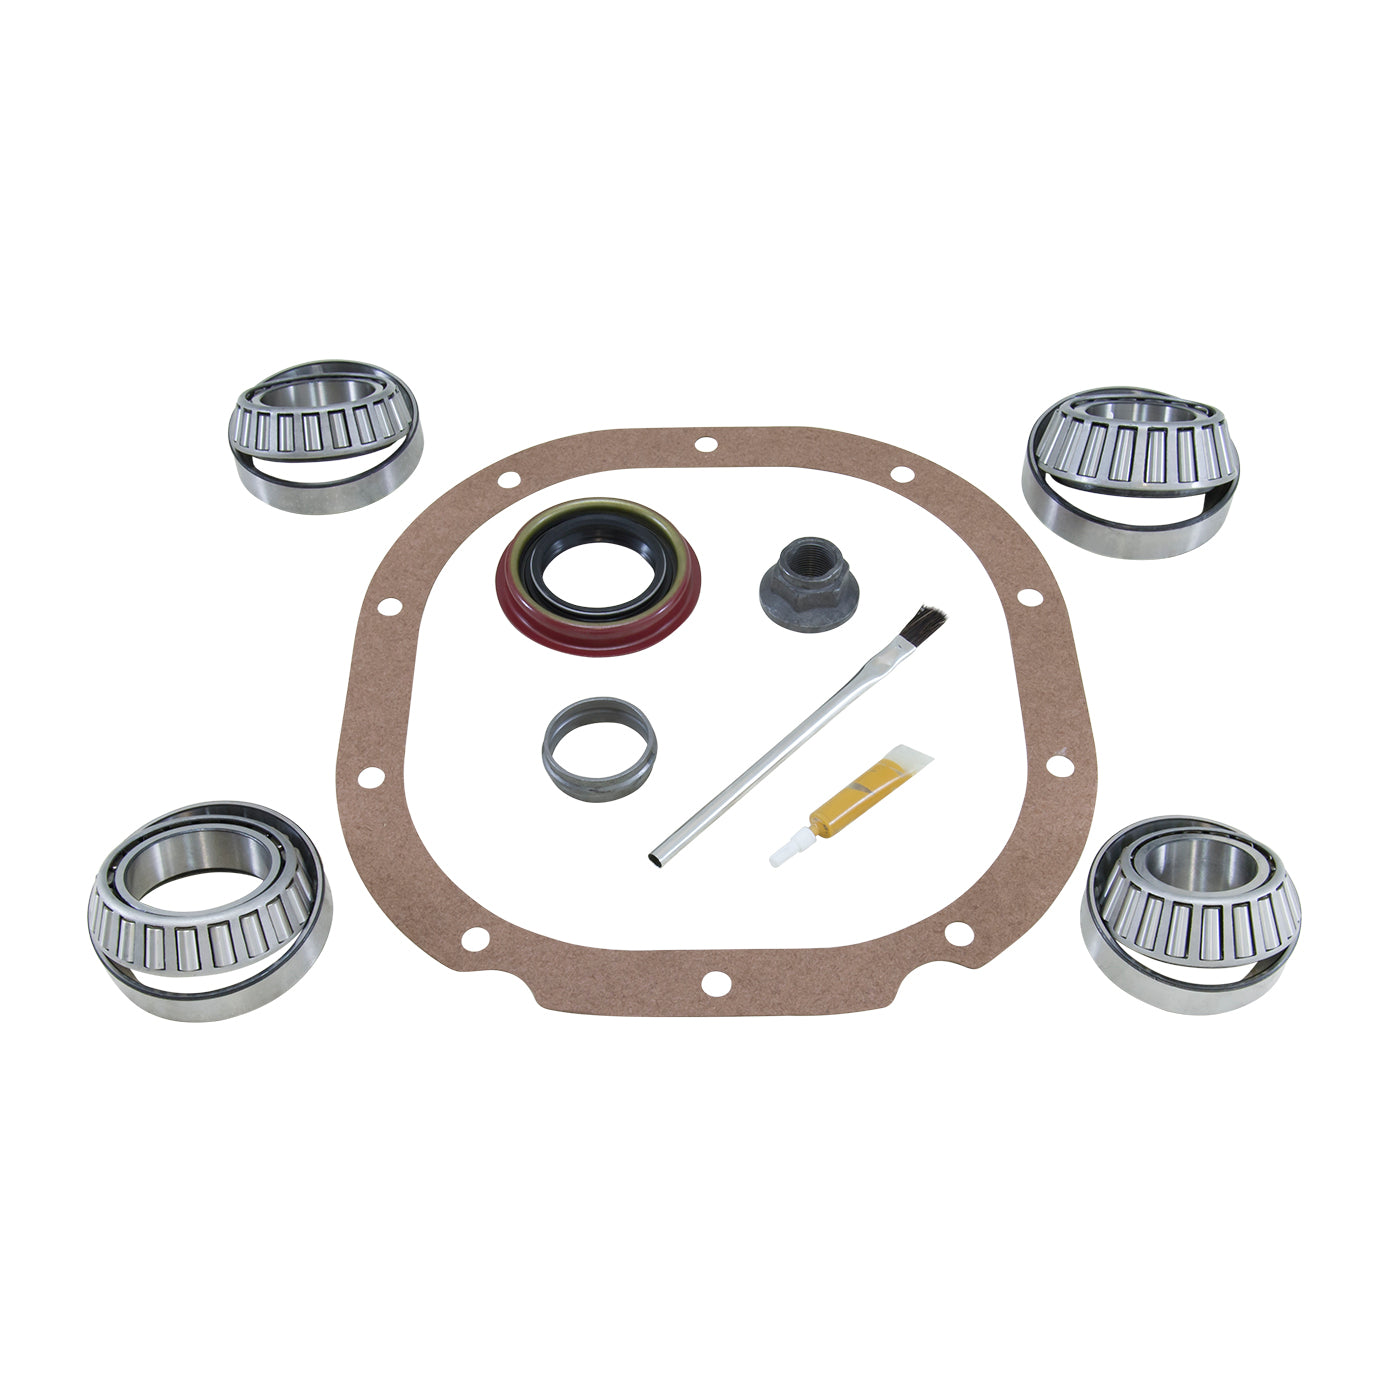 Yukon Gear Bearing install kit for Ford 8.8" differential BK F8.8